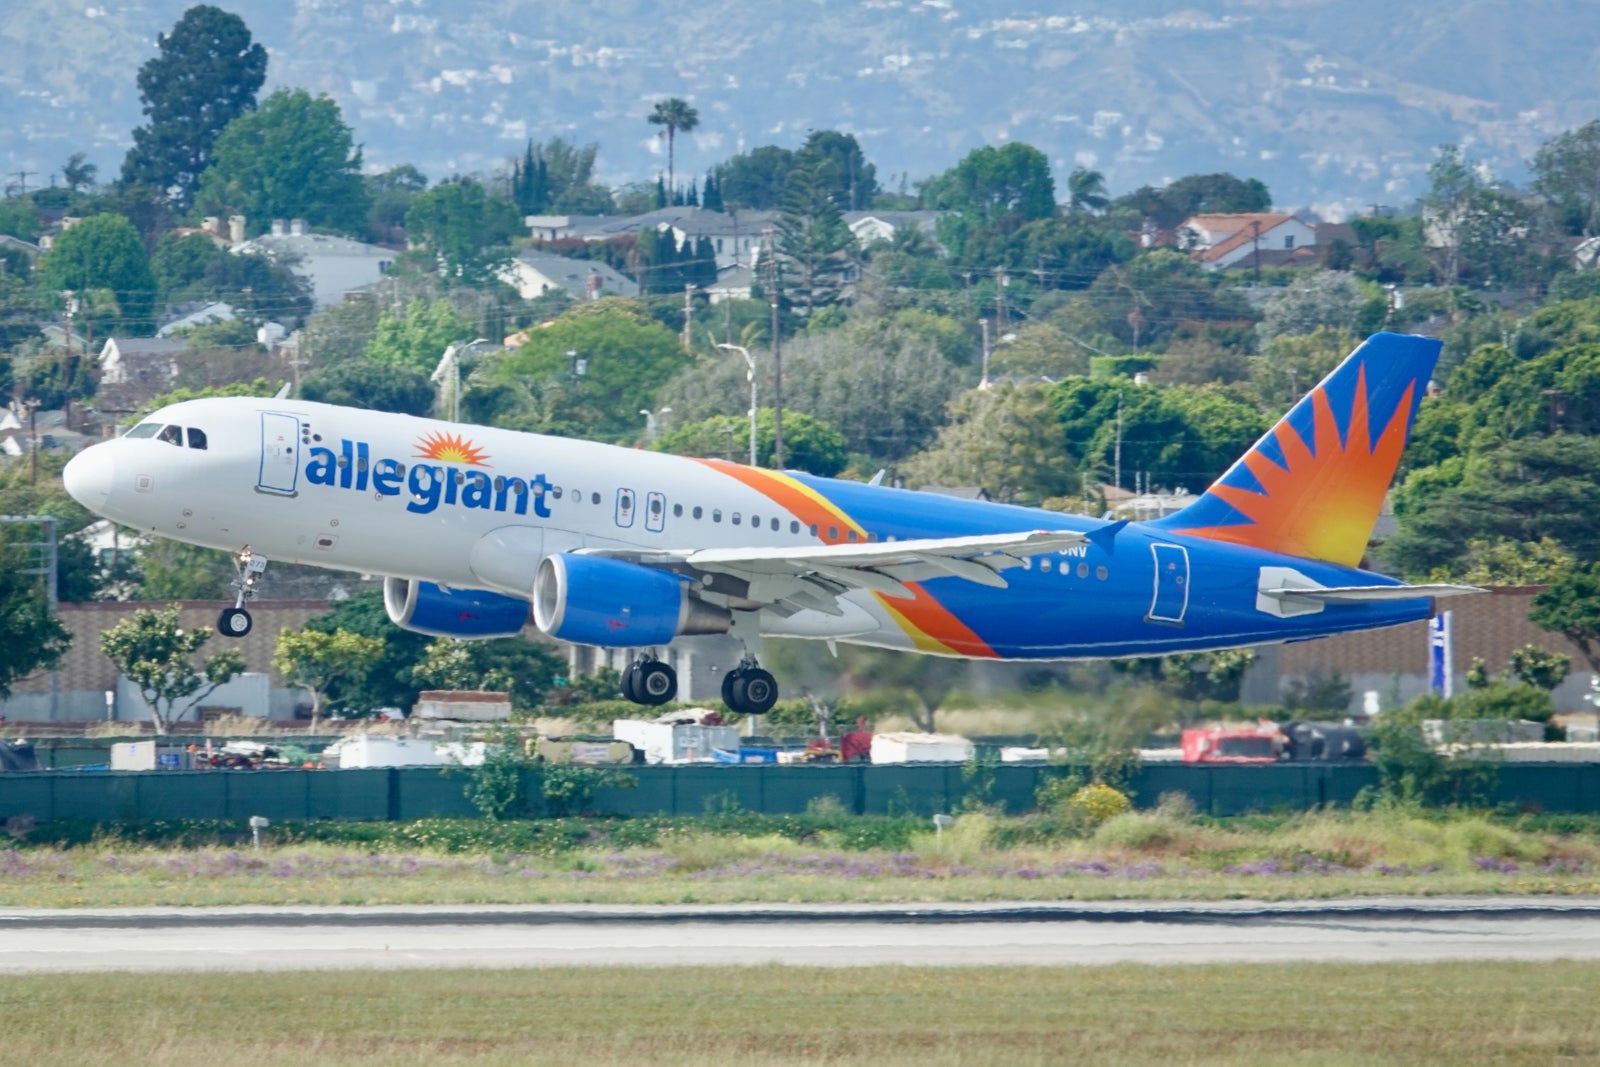 Allegiant adds 12 new routes, 1 new airport with intro fares from $49 one-way